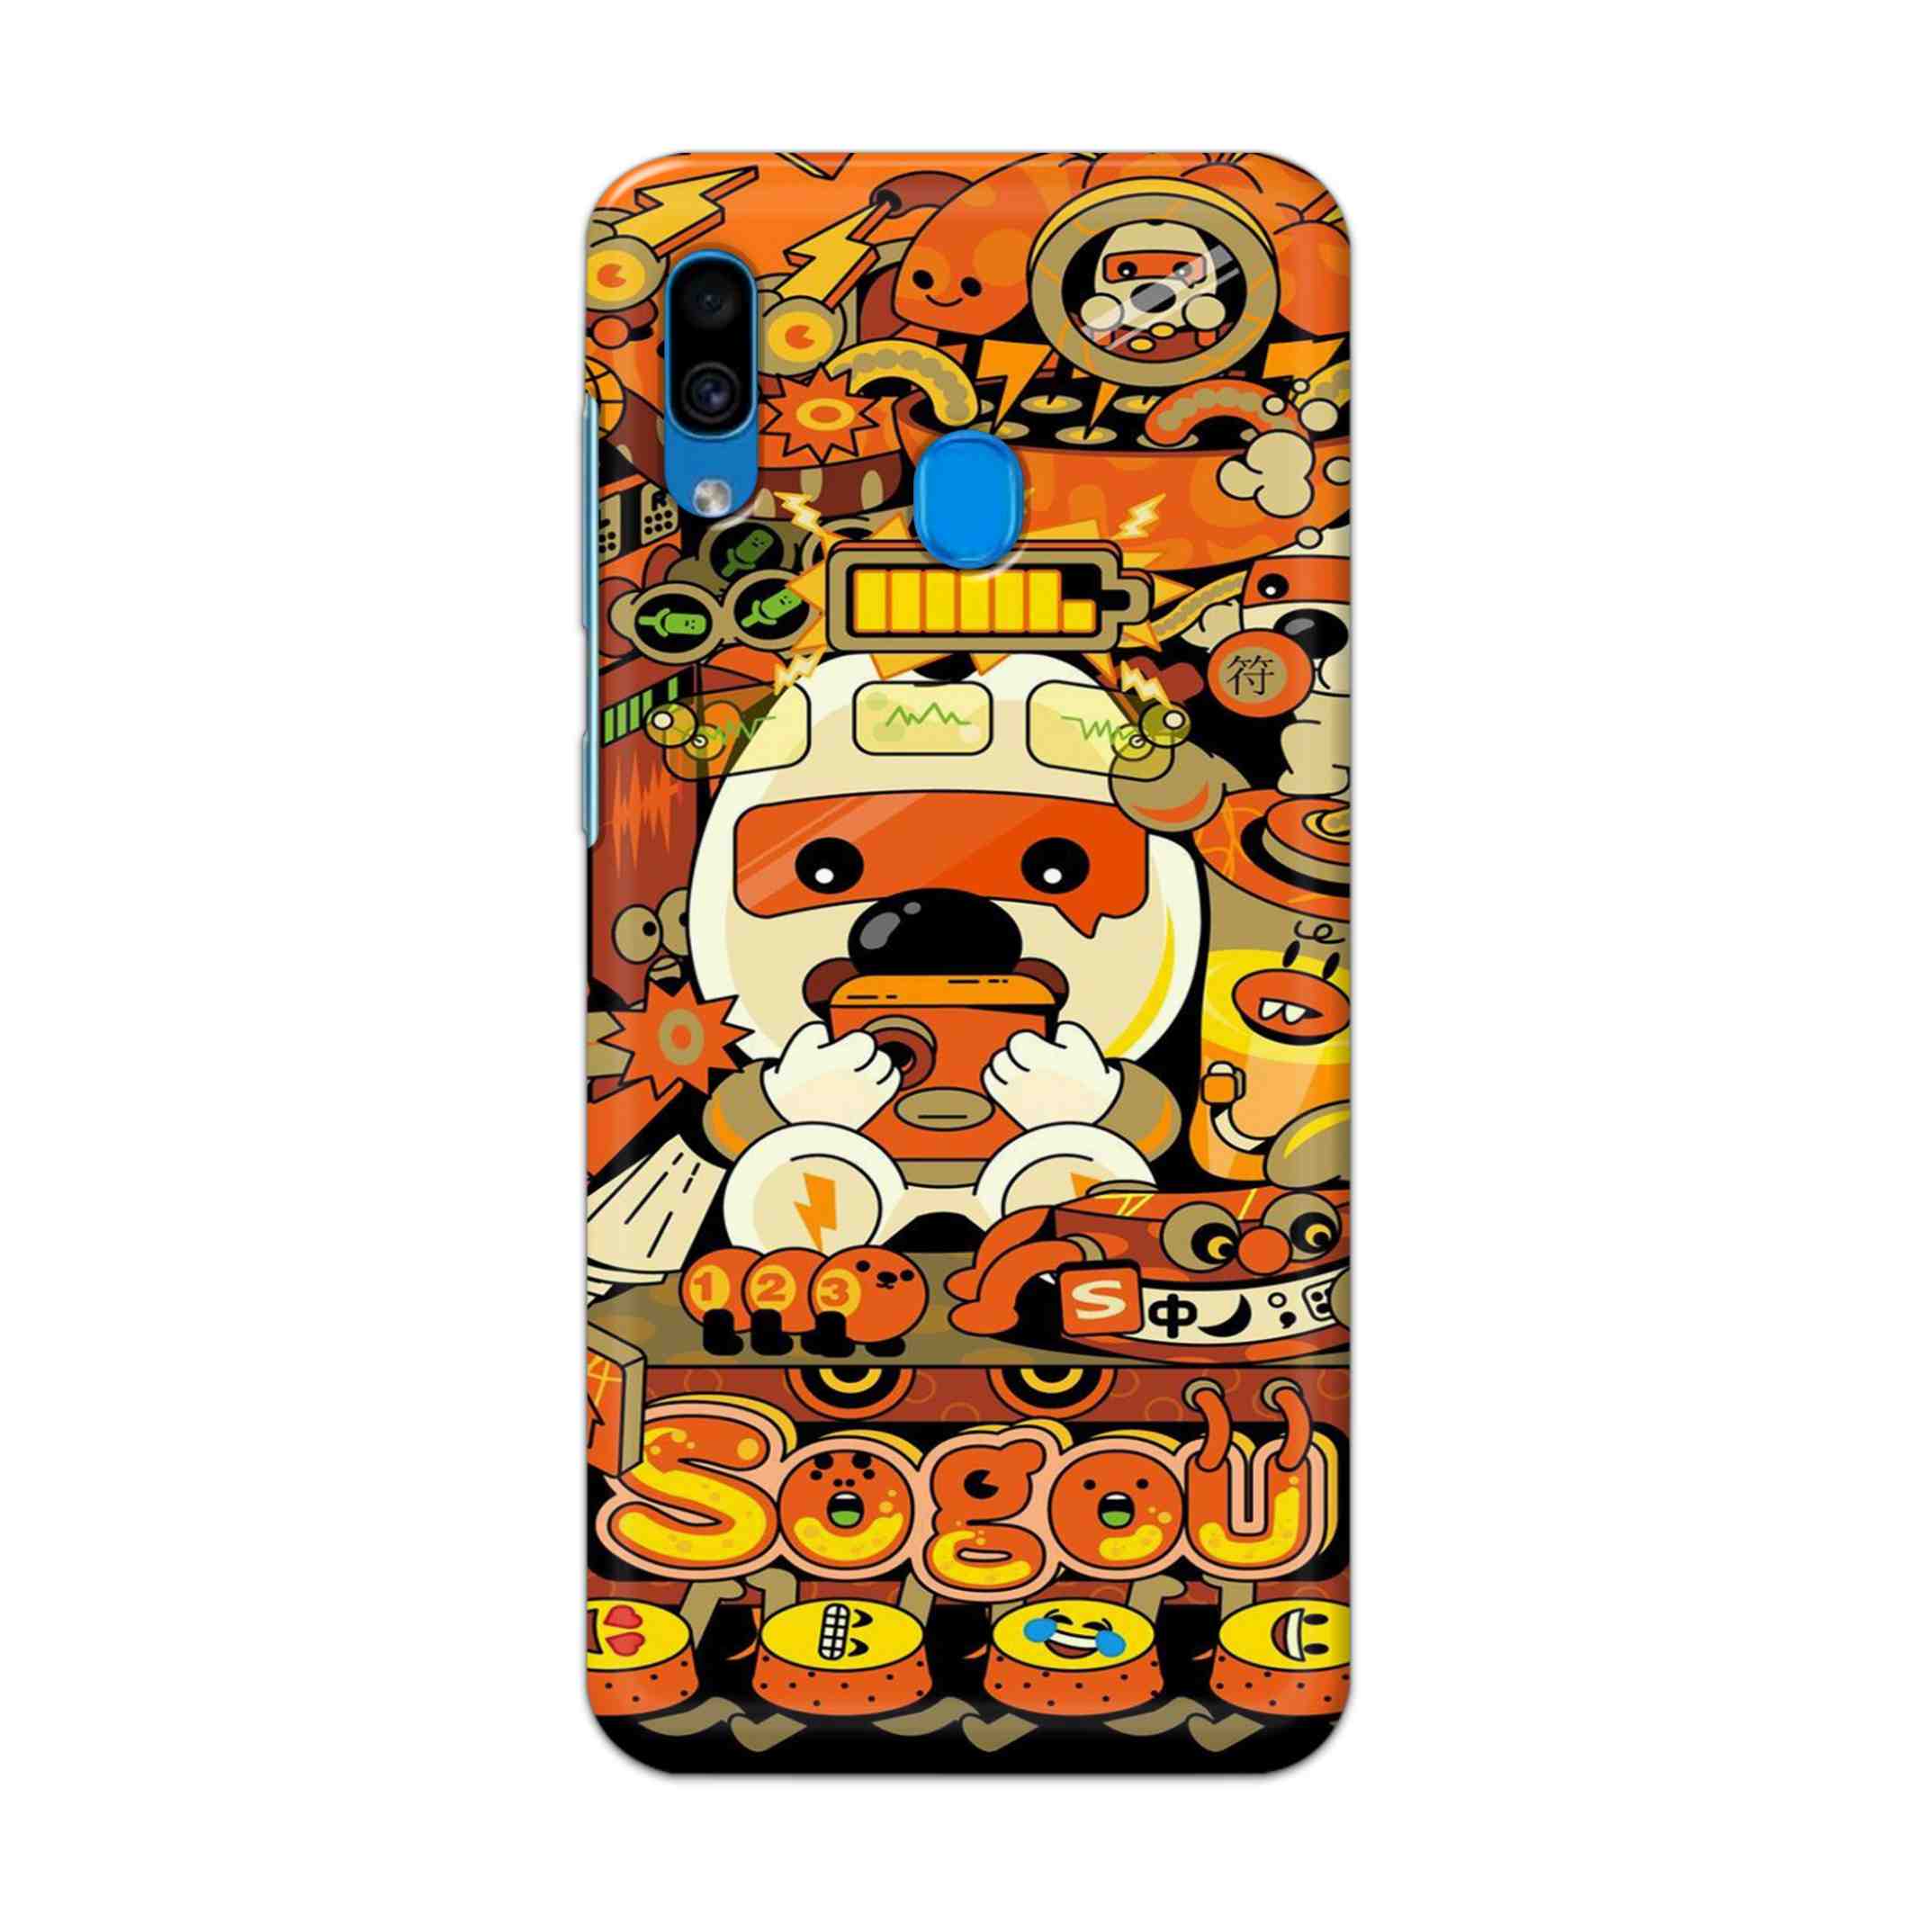 Buy Sogou Hard Back Mobile Phone Case Cover For Samsung Galaxy A30 Online